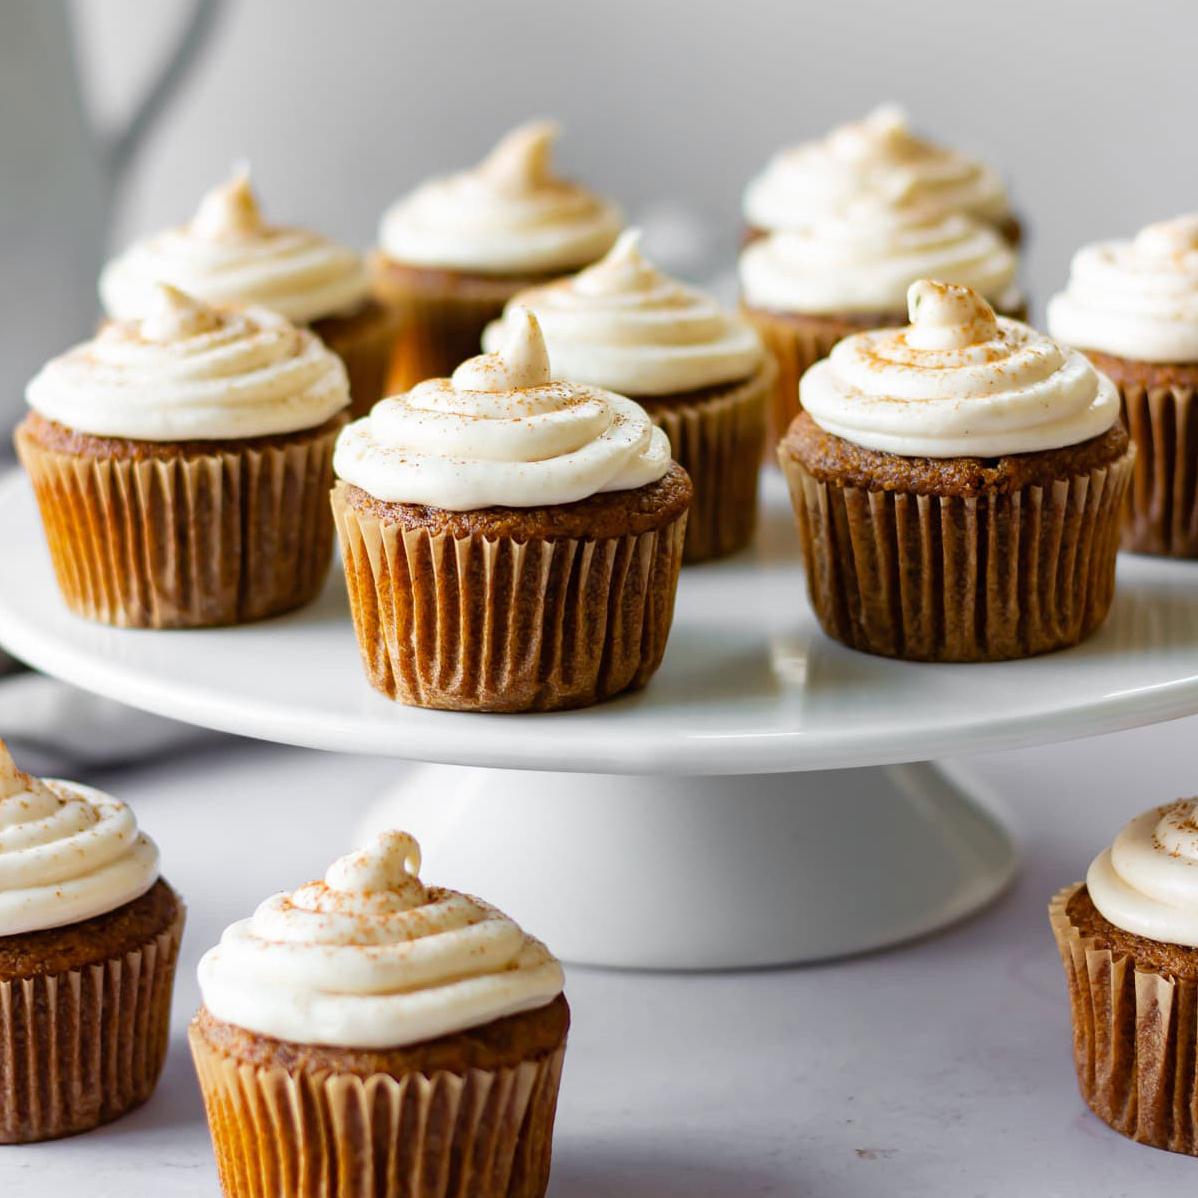  These cupcakes are so good, you won't even miss the gluten